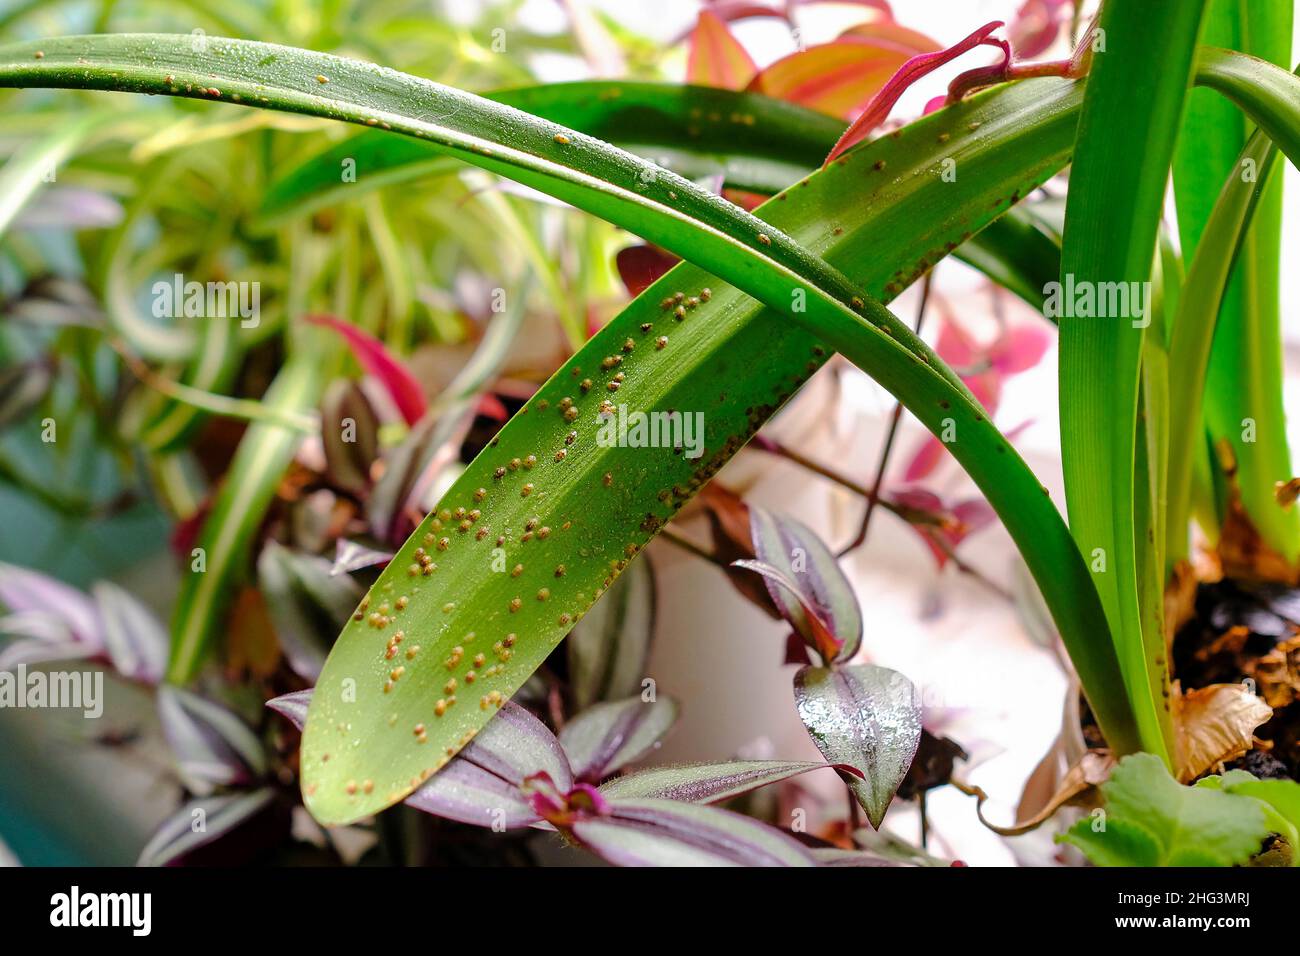 Diaspididae on long leaves of a houseplant. Small insect pests. Stock Photo